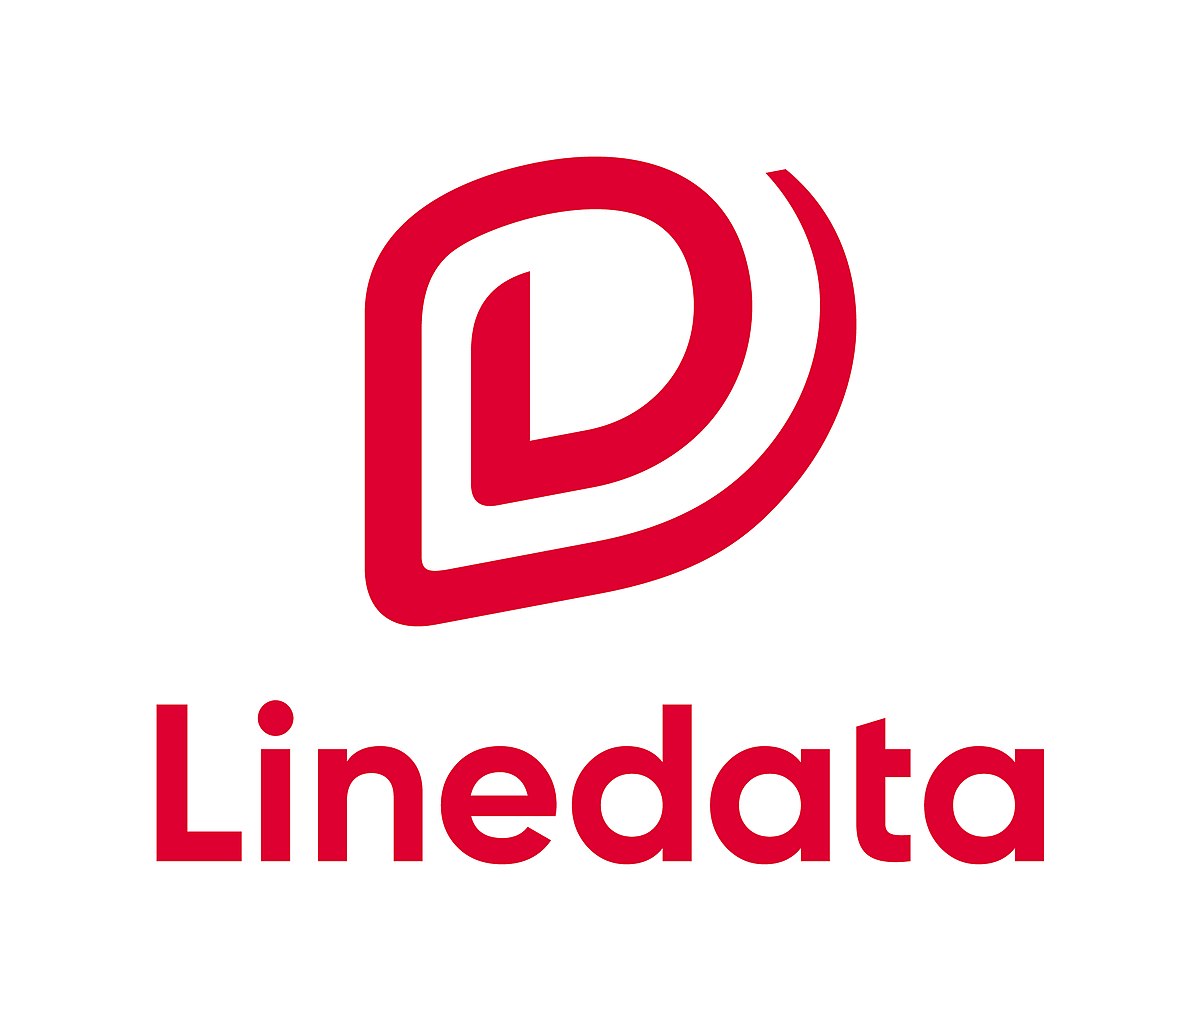 Linedata launches its new generation platform for credit origination and risk management